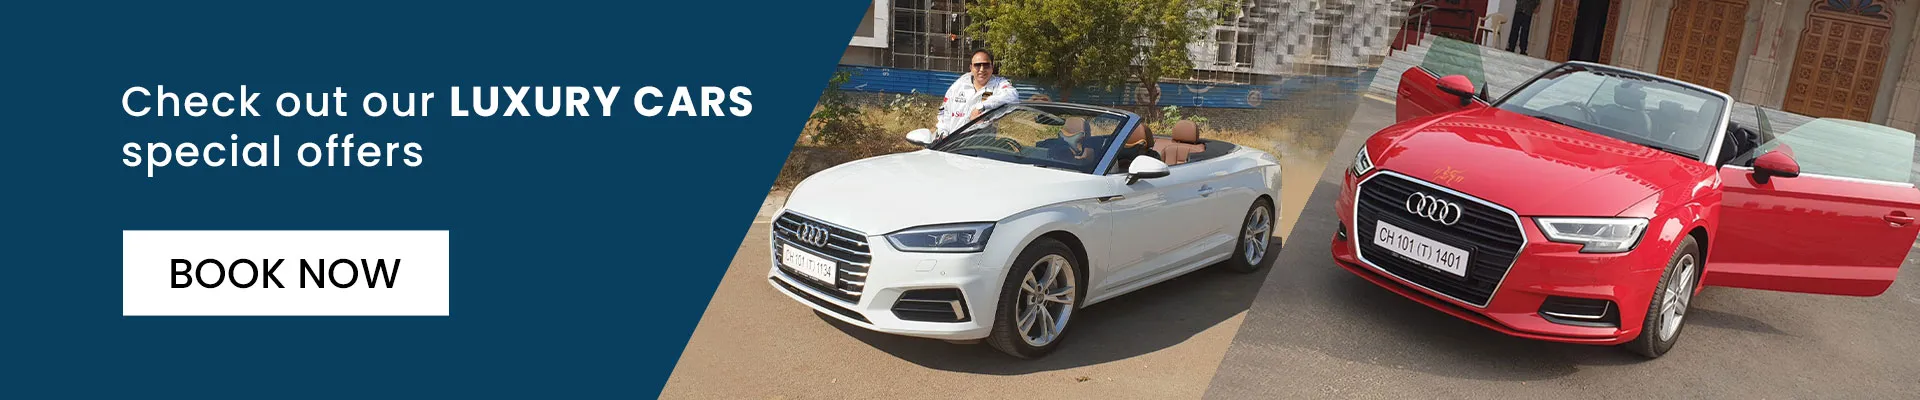 Luxury Convertible Audi A3 Car Hire in Jaipur